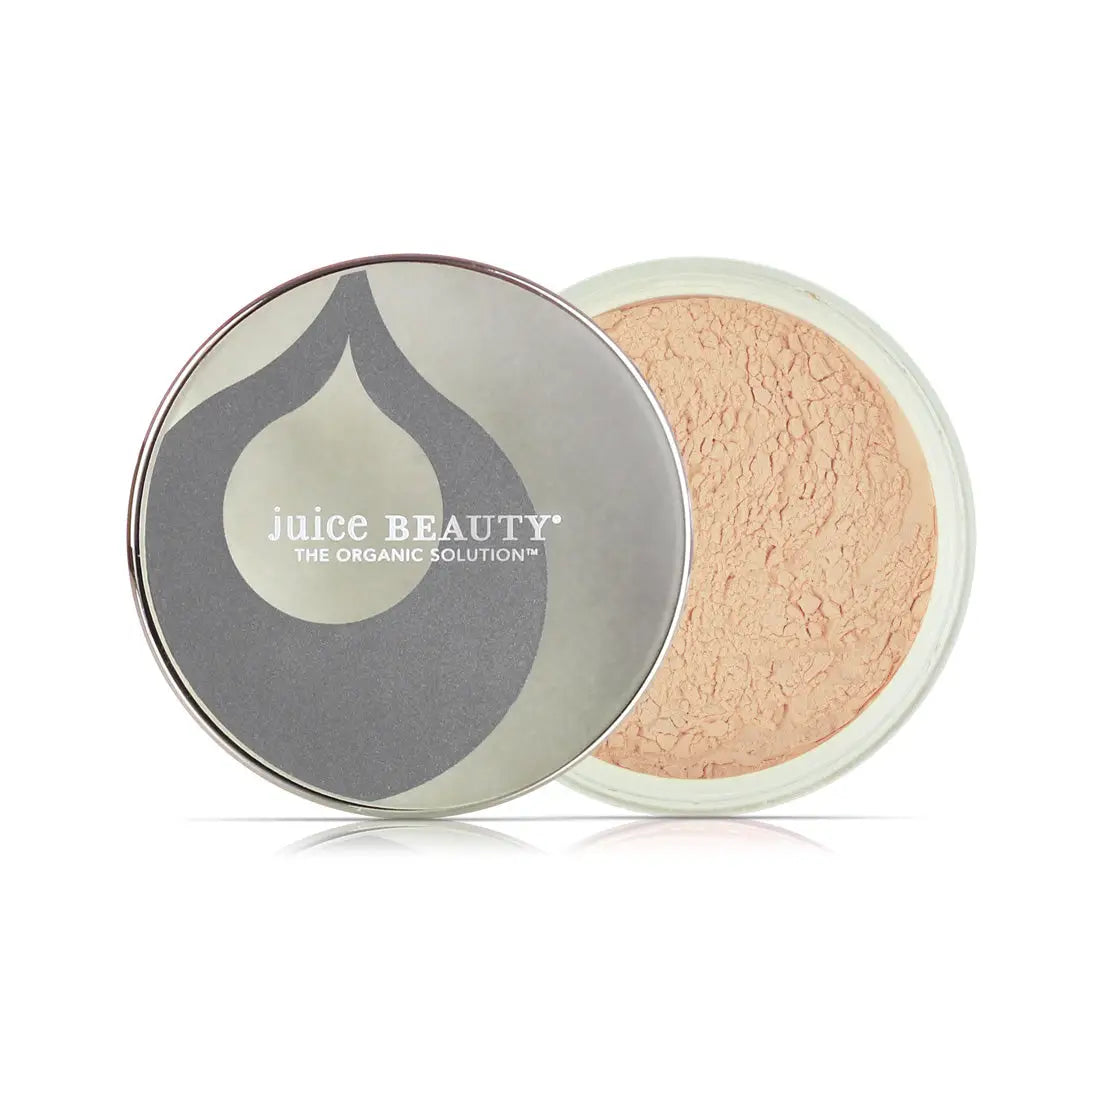 Juice Beauty Phyto Pigments Light-Diffusing Dust 11 Rosy Beige 7g